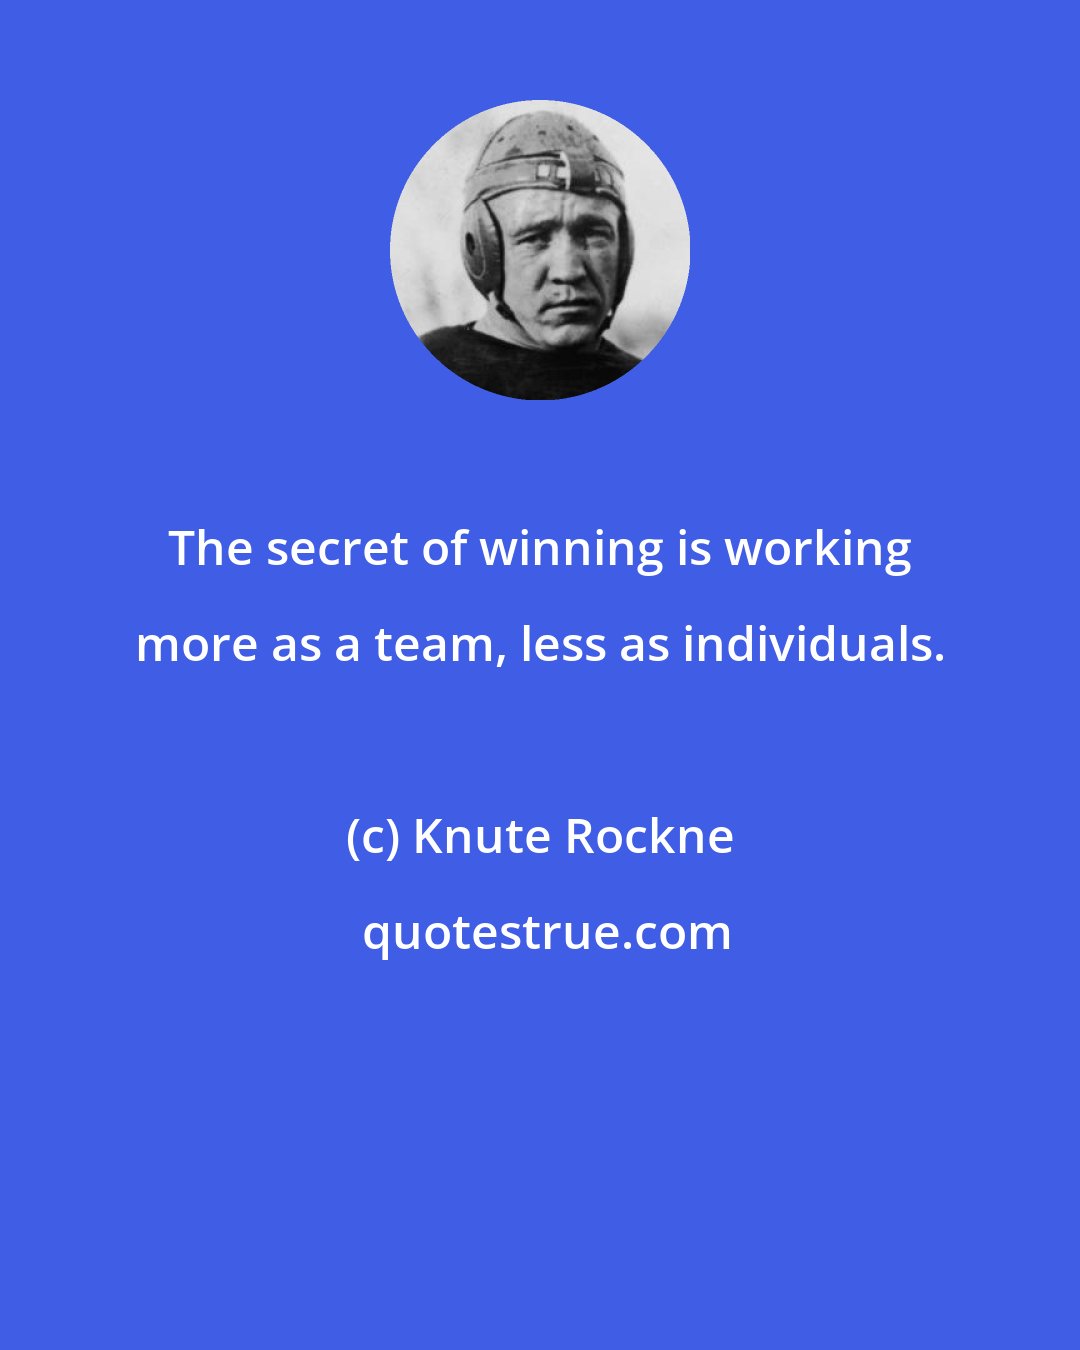 Knute Rockne: The secret of winning is working more as a team, less as individuals.